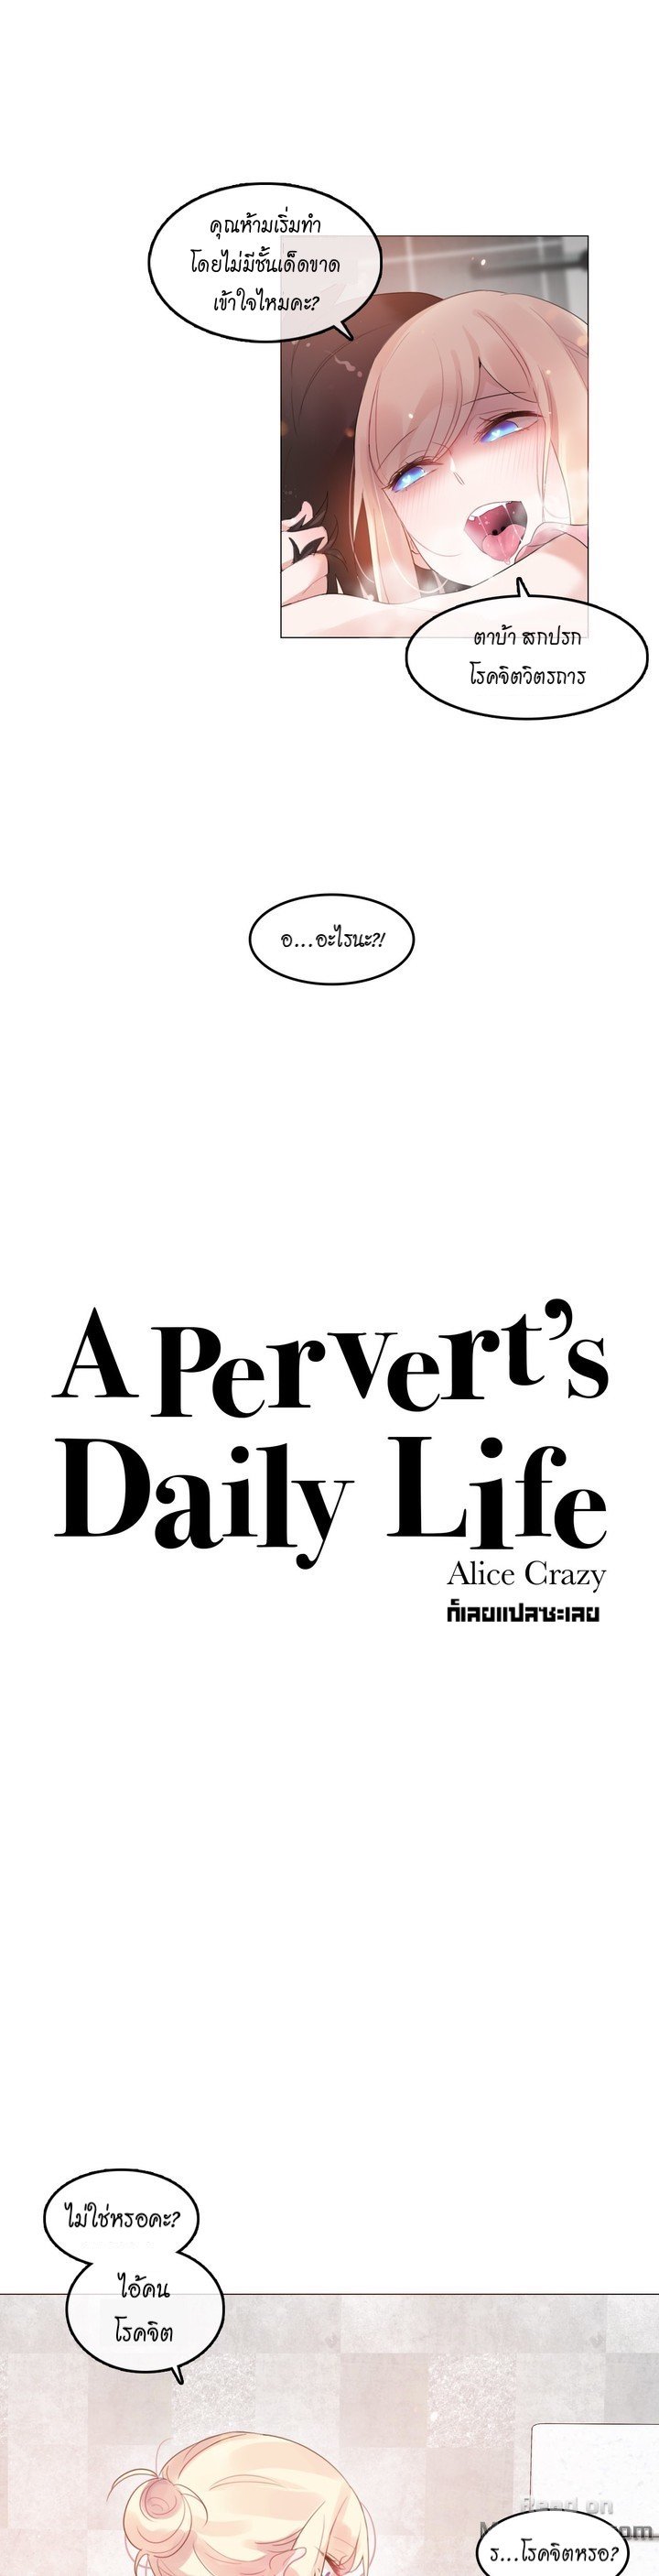 A Pervert’s Daily Life 69 01